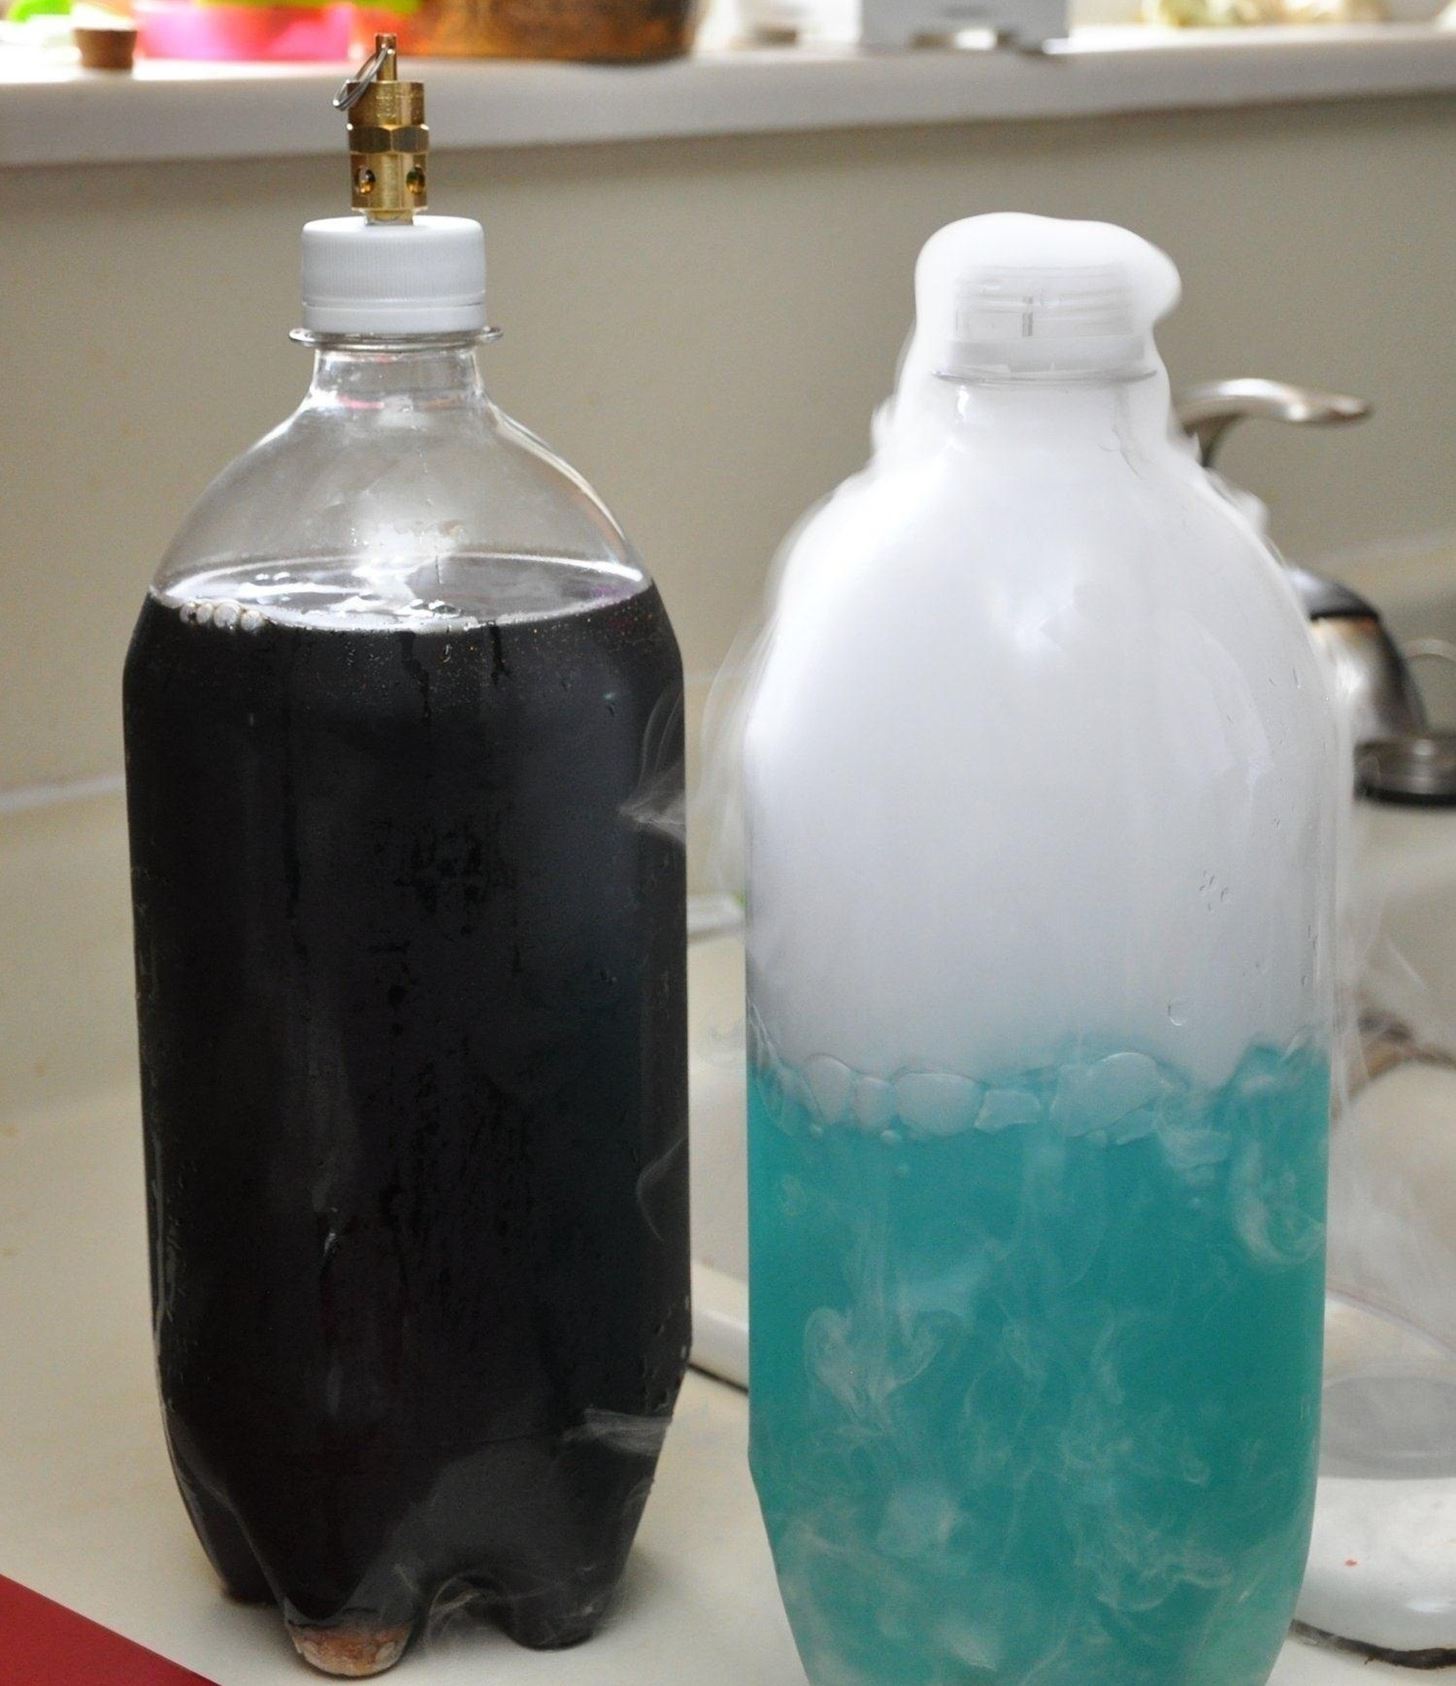 How to Make Your Own Soda Pop at Home with a DIY Carbonation Kit